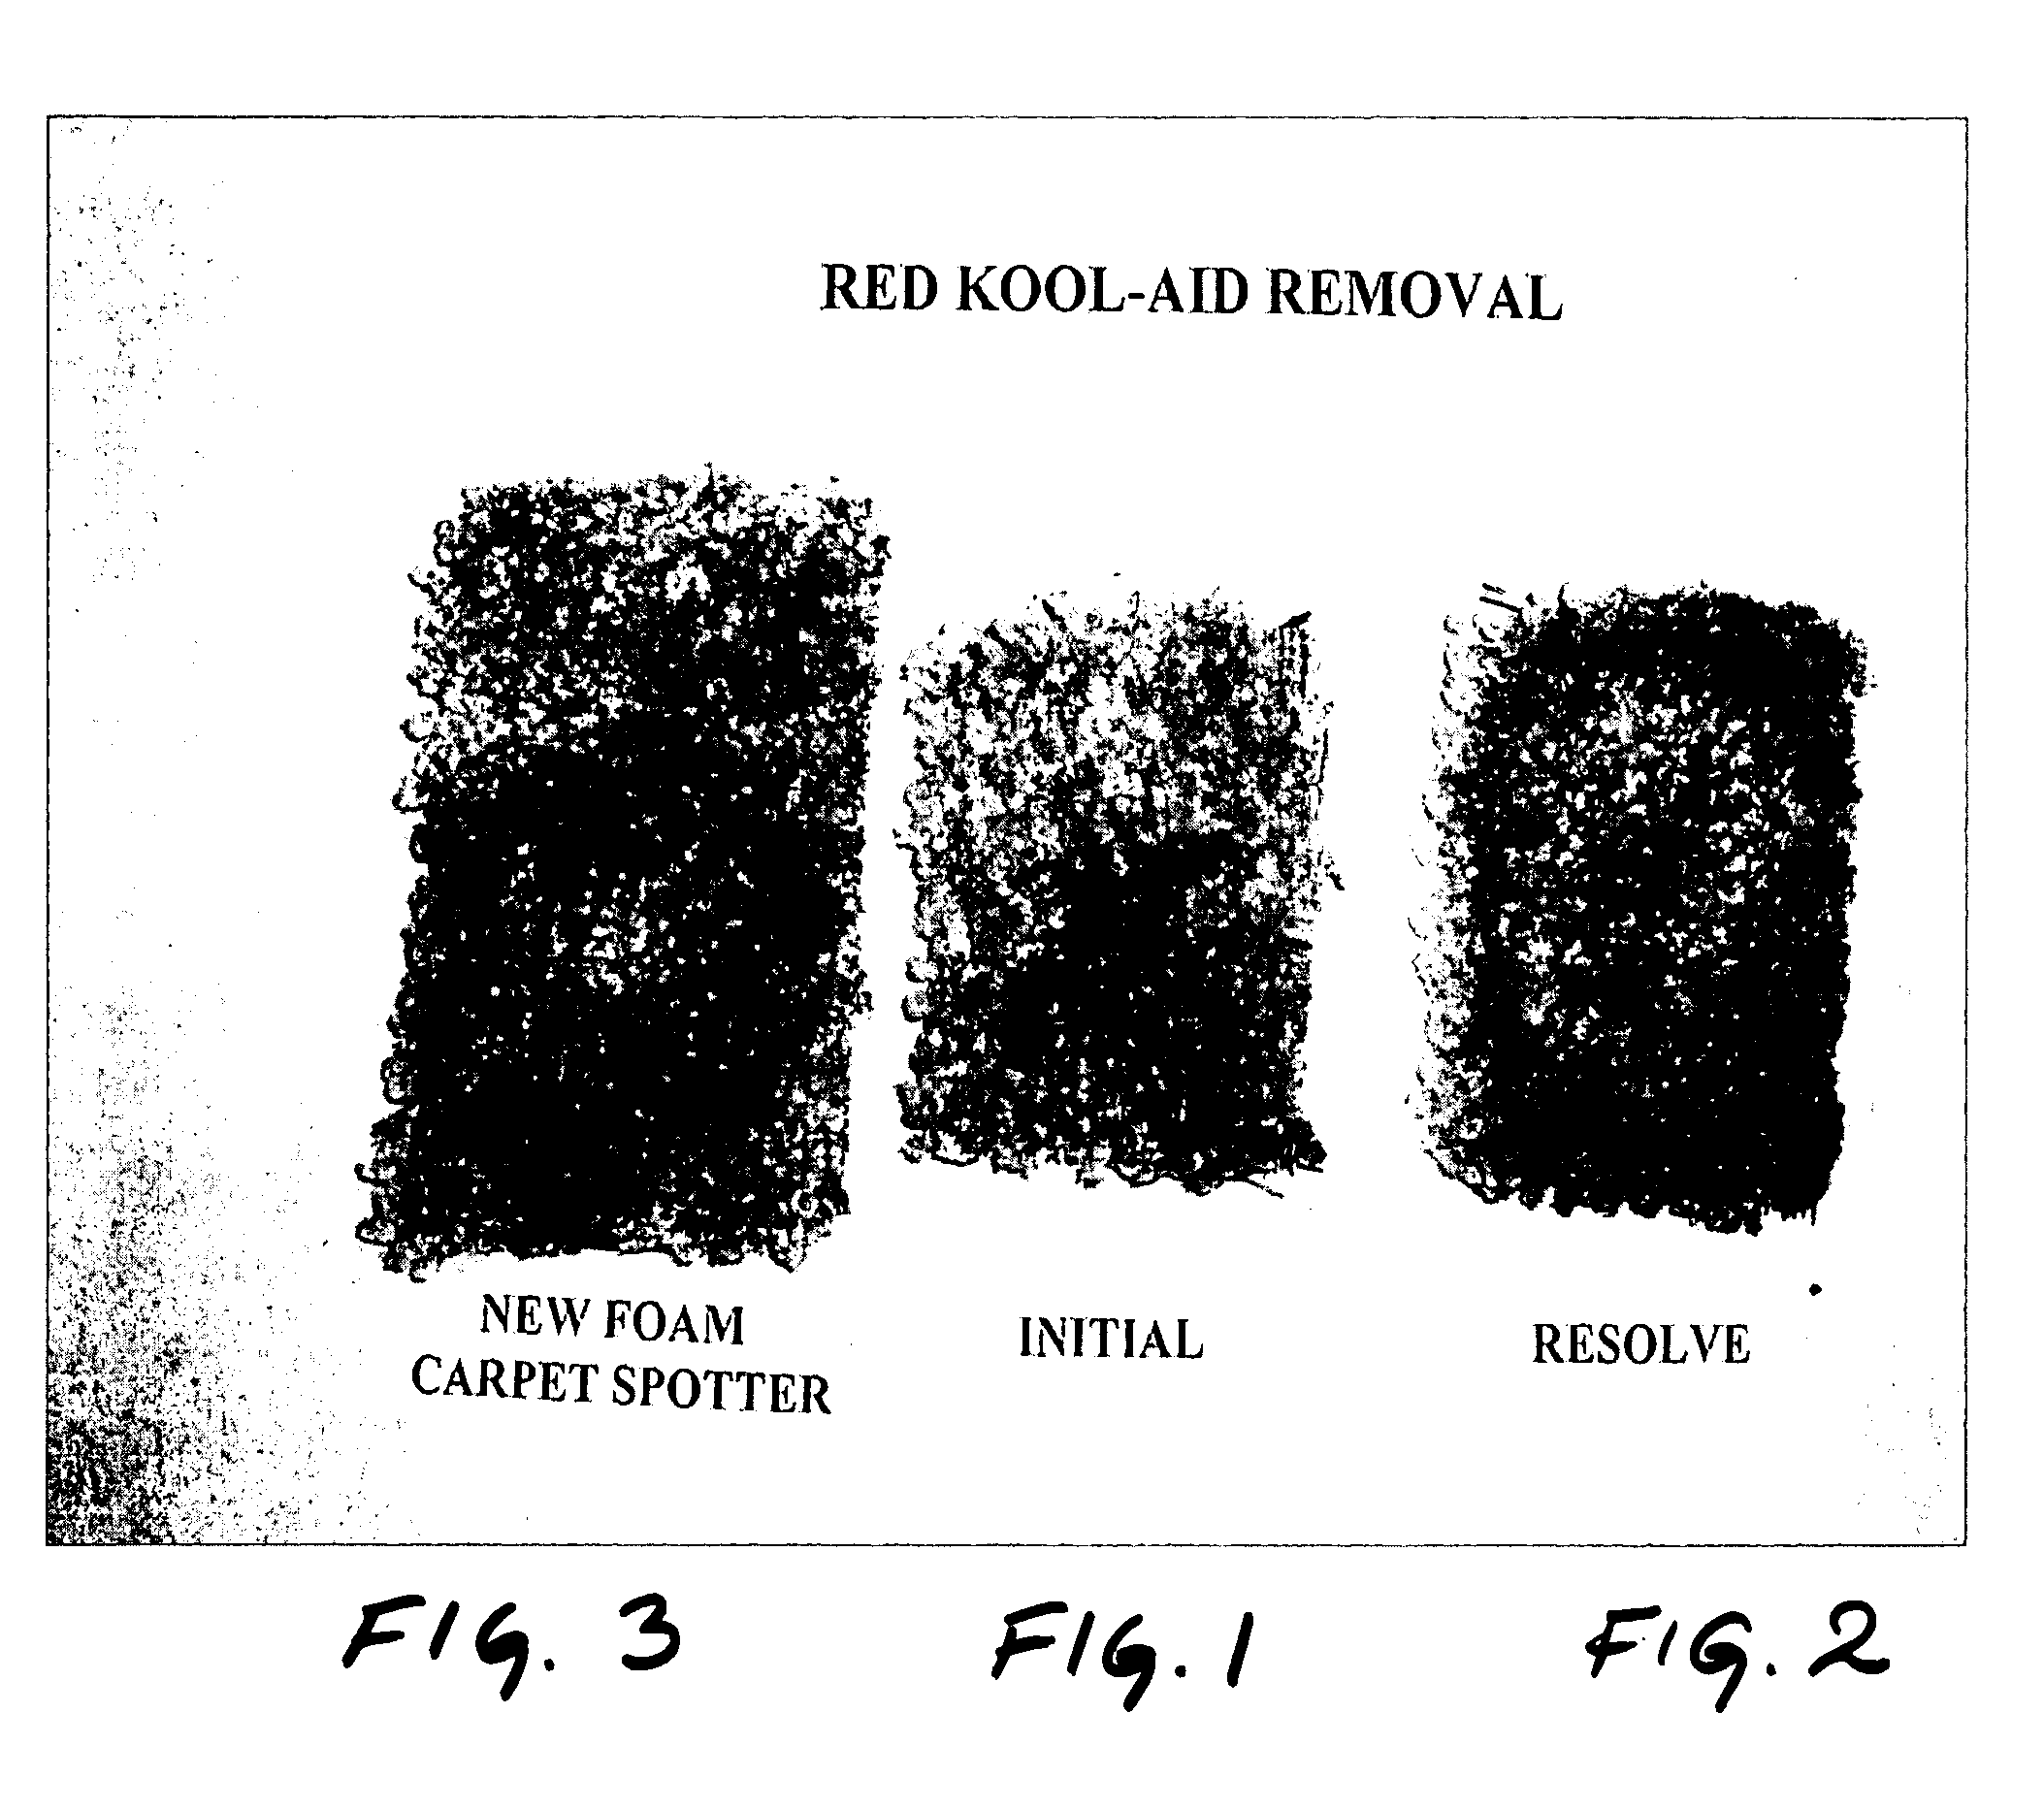 Cleaning composition and methods